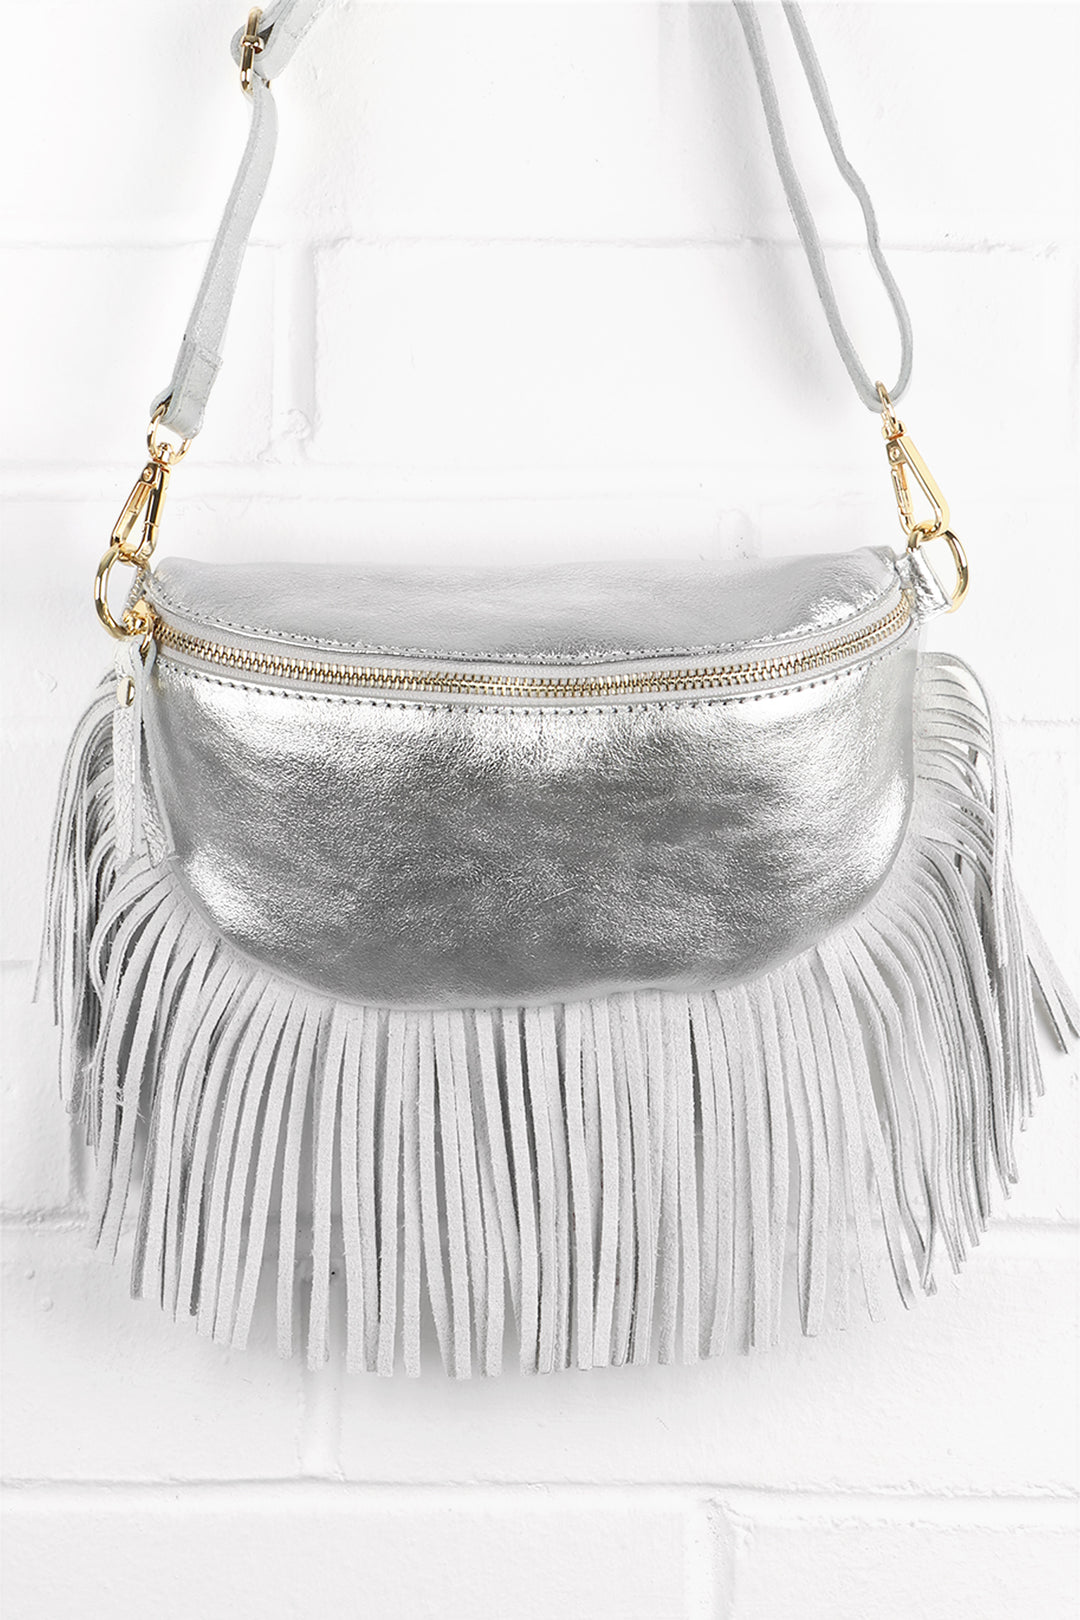 silver leather halfmoon bag with fringed trim and zip closure